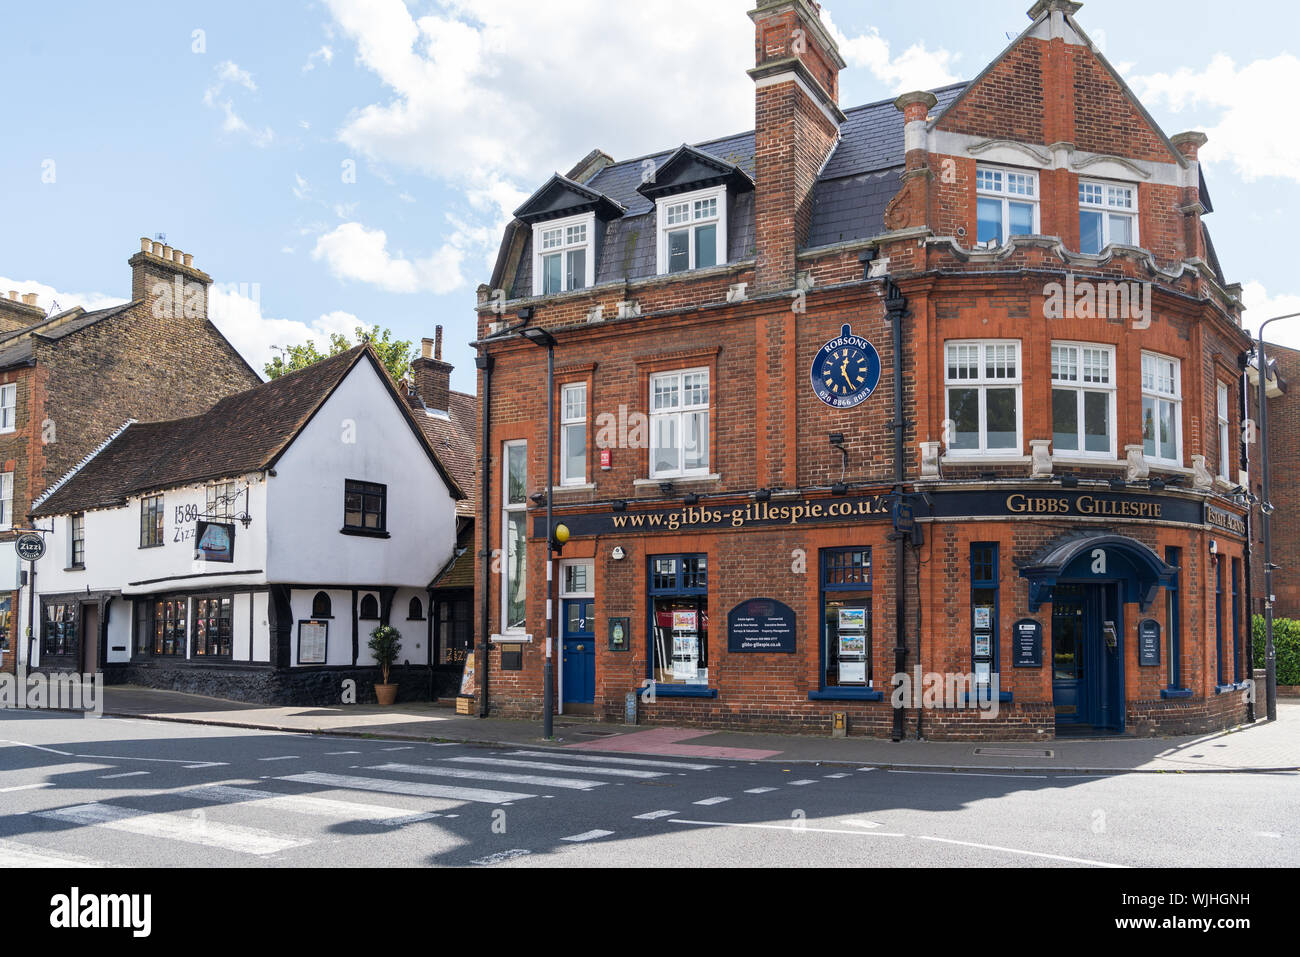 Gibbs Gillespie estate agents office building, Pinn House, stands next to  the old Victory pub building, High Street, Pinner, Middlesex, England Stock  Photo - Alamy